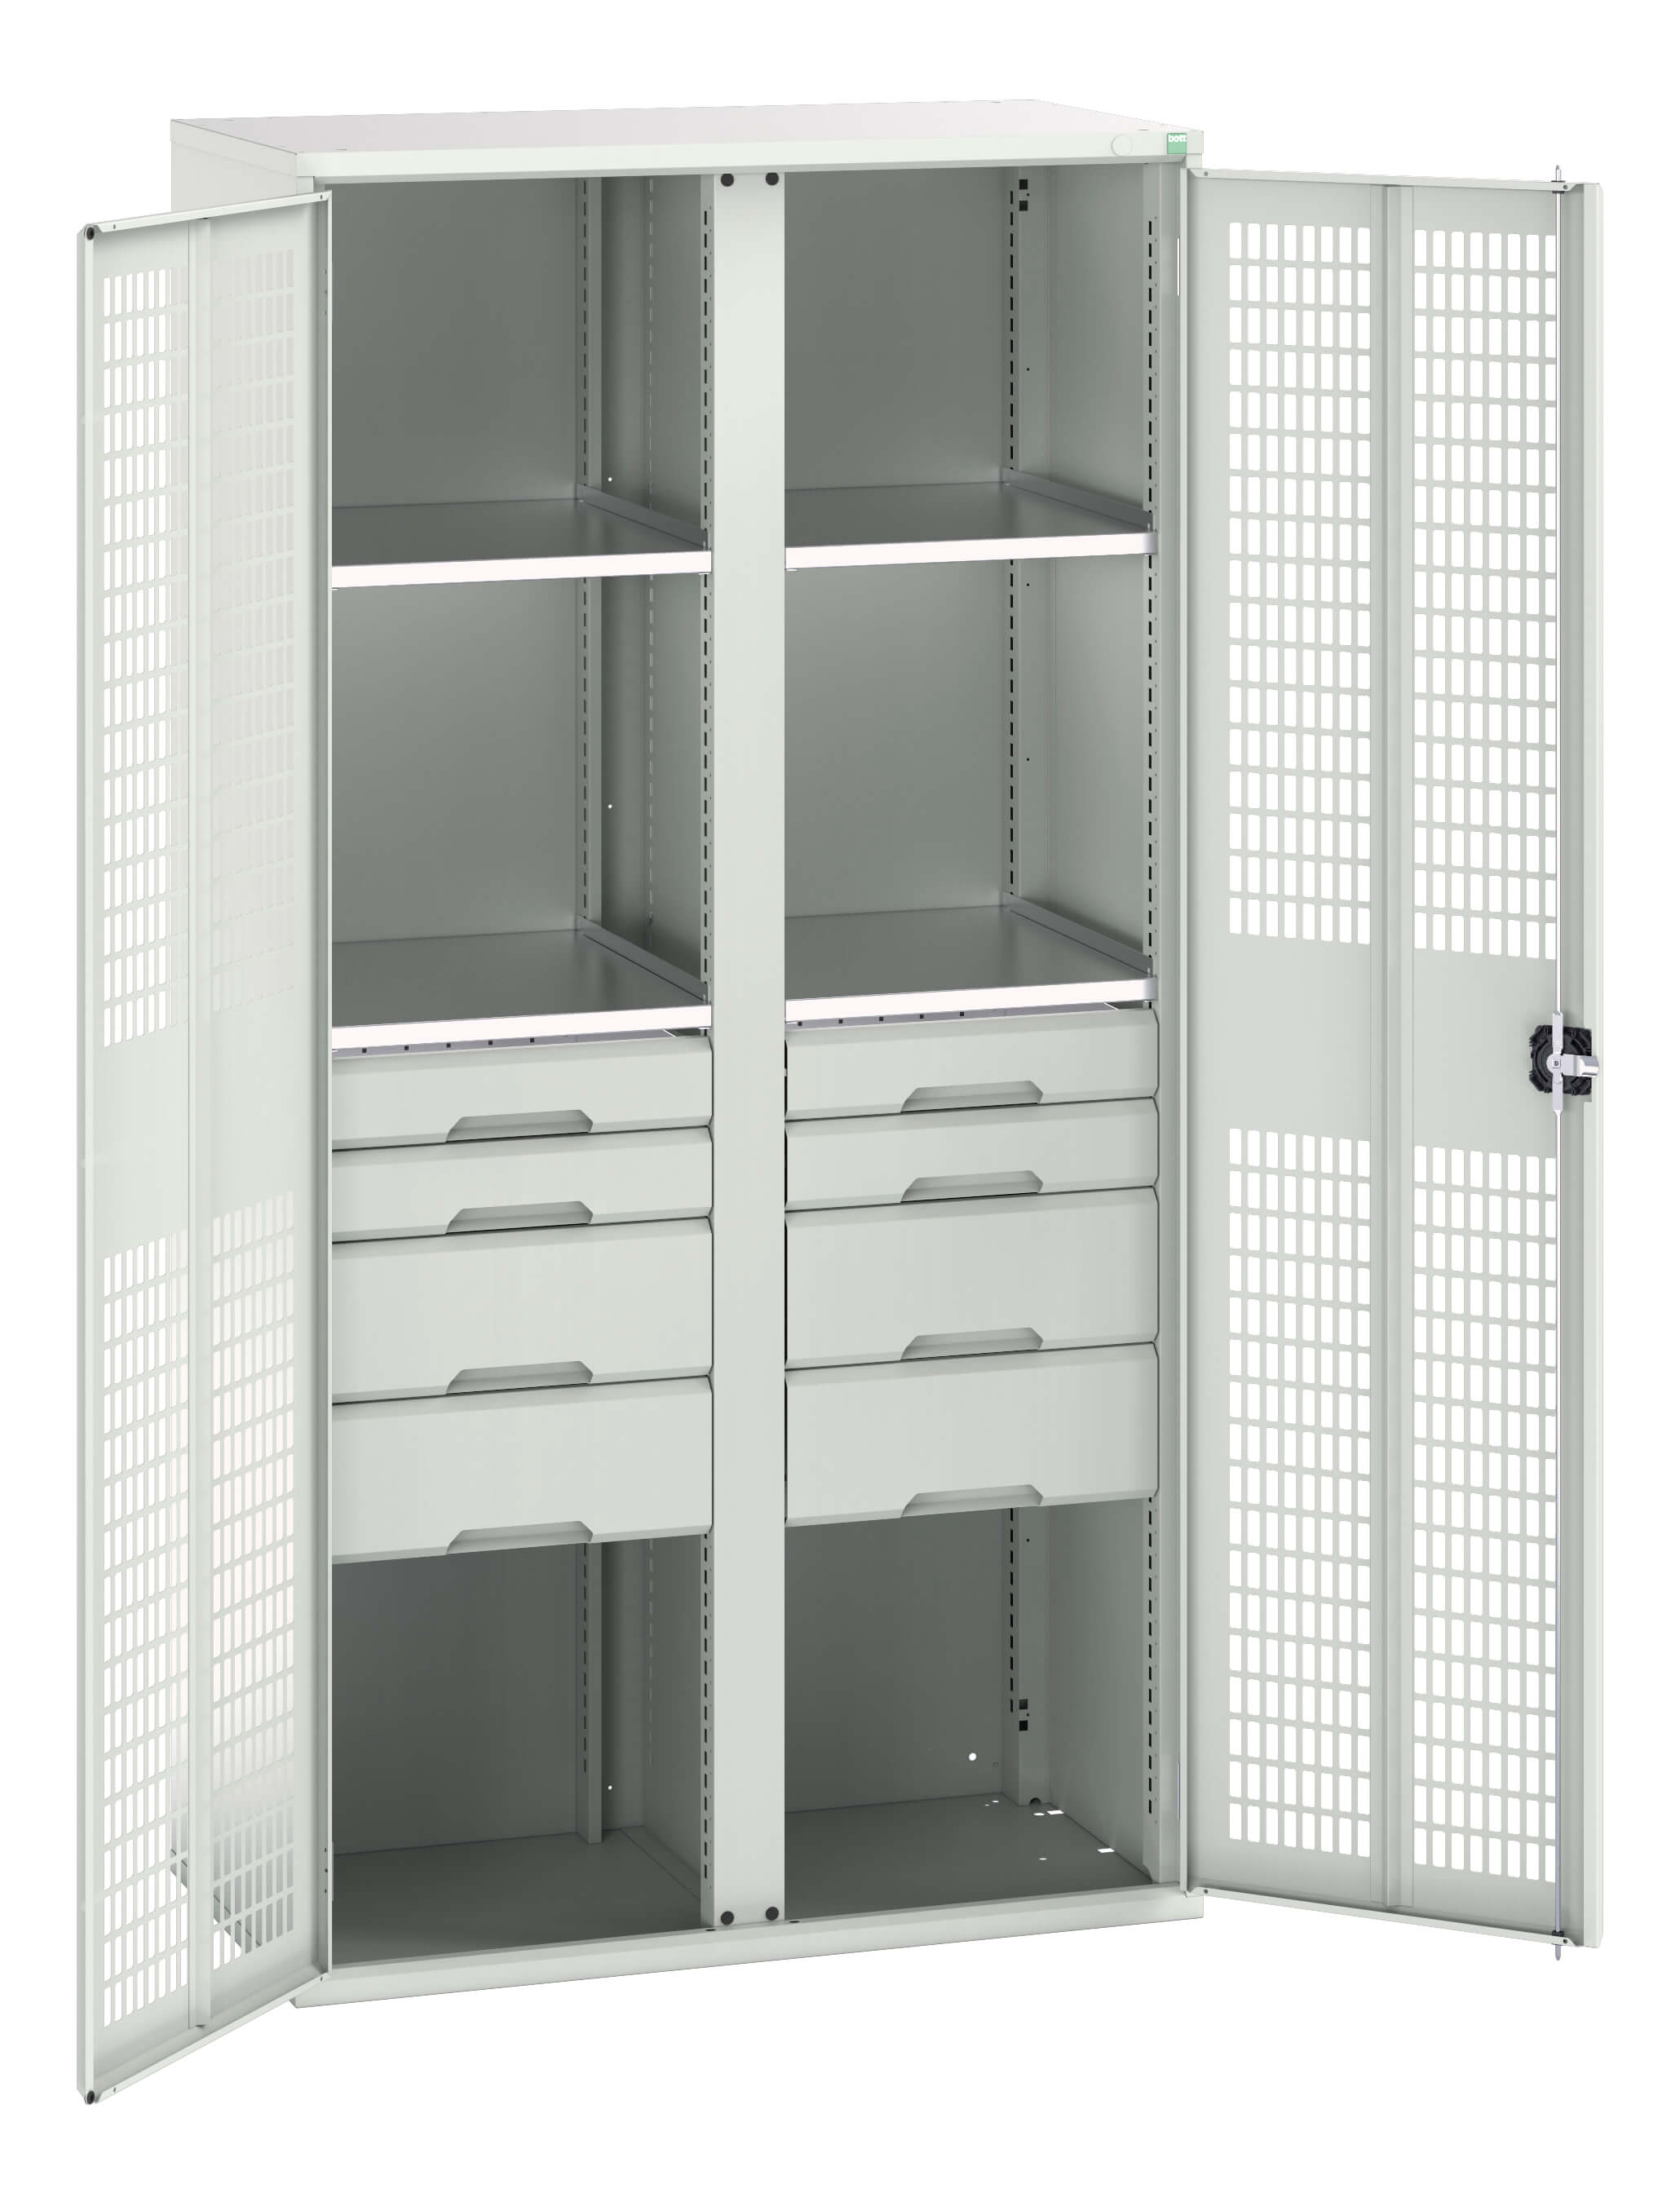 Bott Verso Ventilated Door Kitted Cupboard With Vertical Partition - 16926778.16